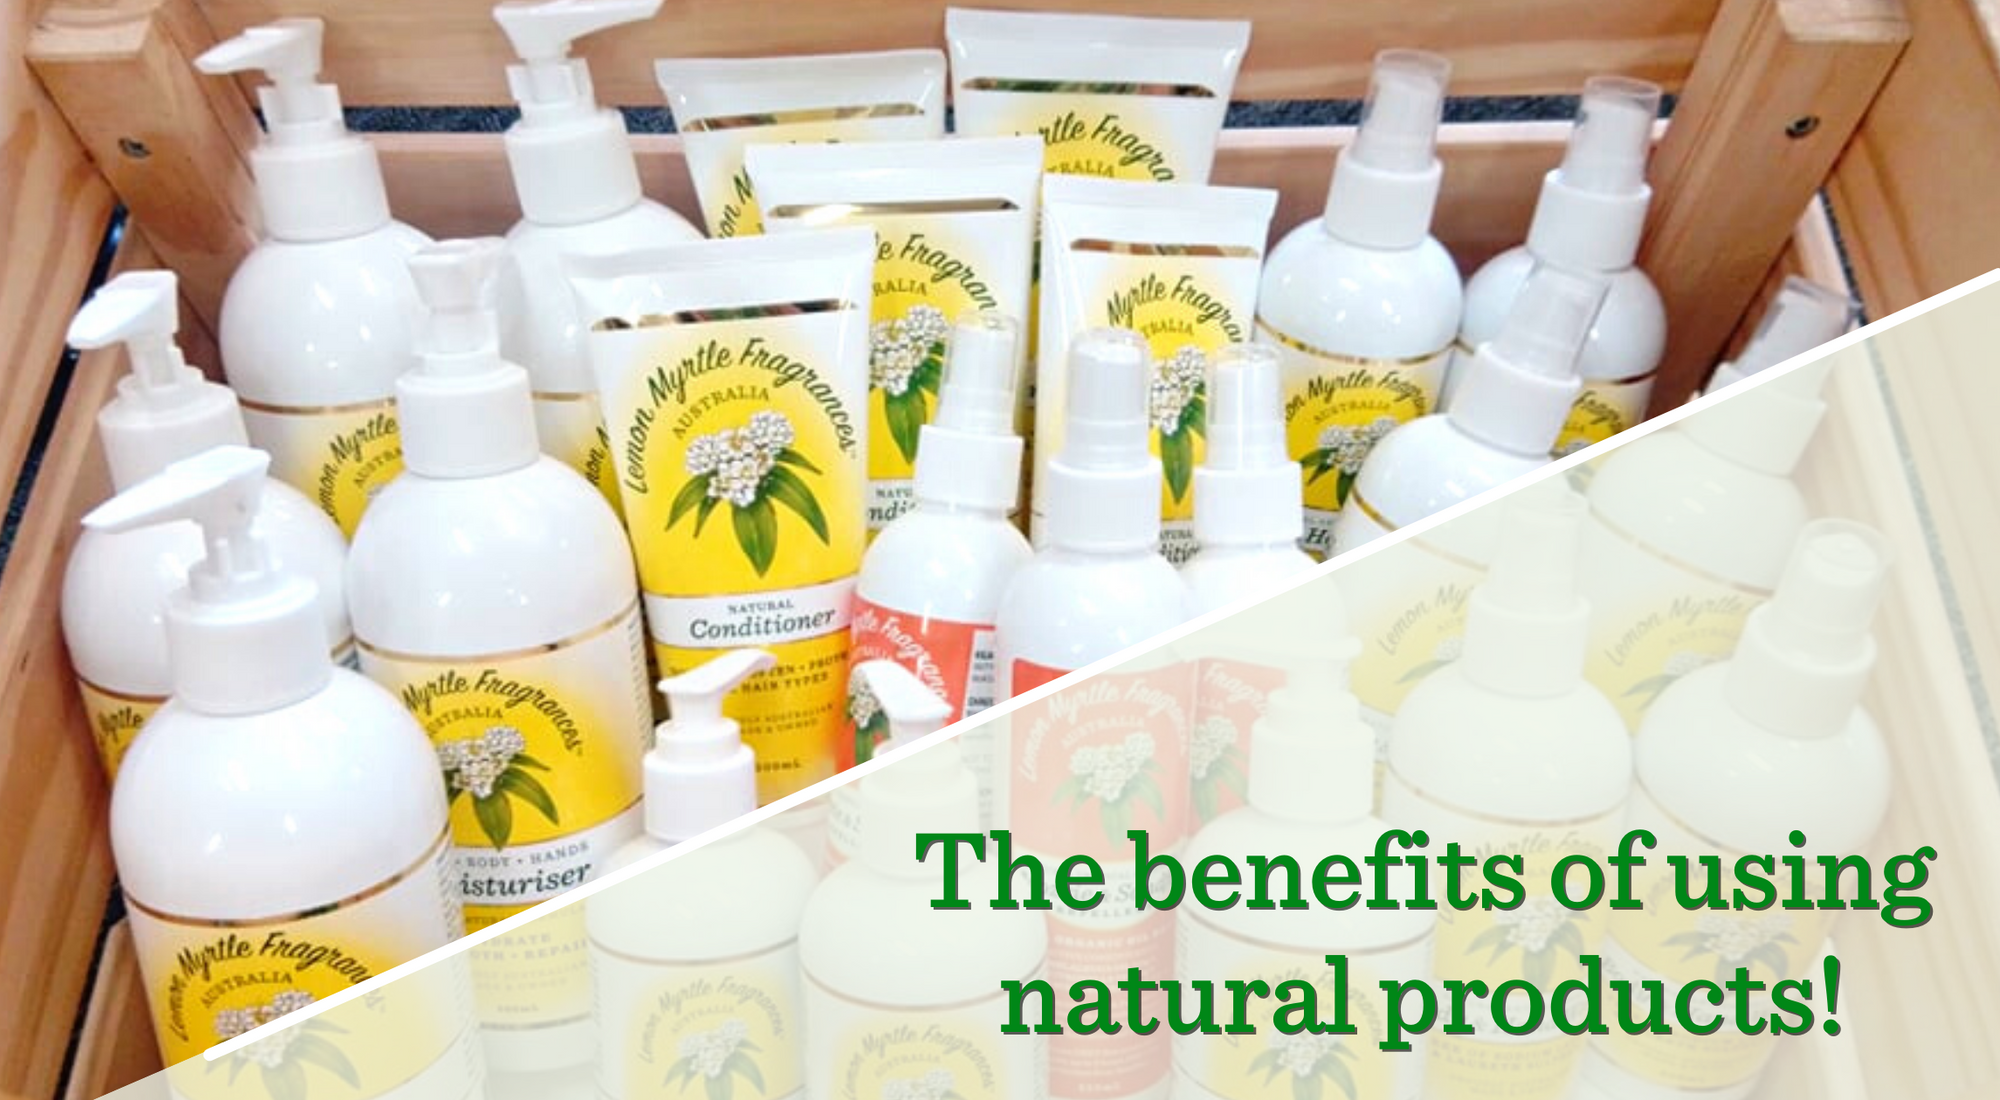 The benefits of using natural products